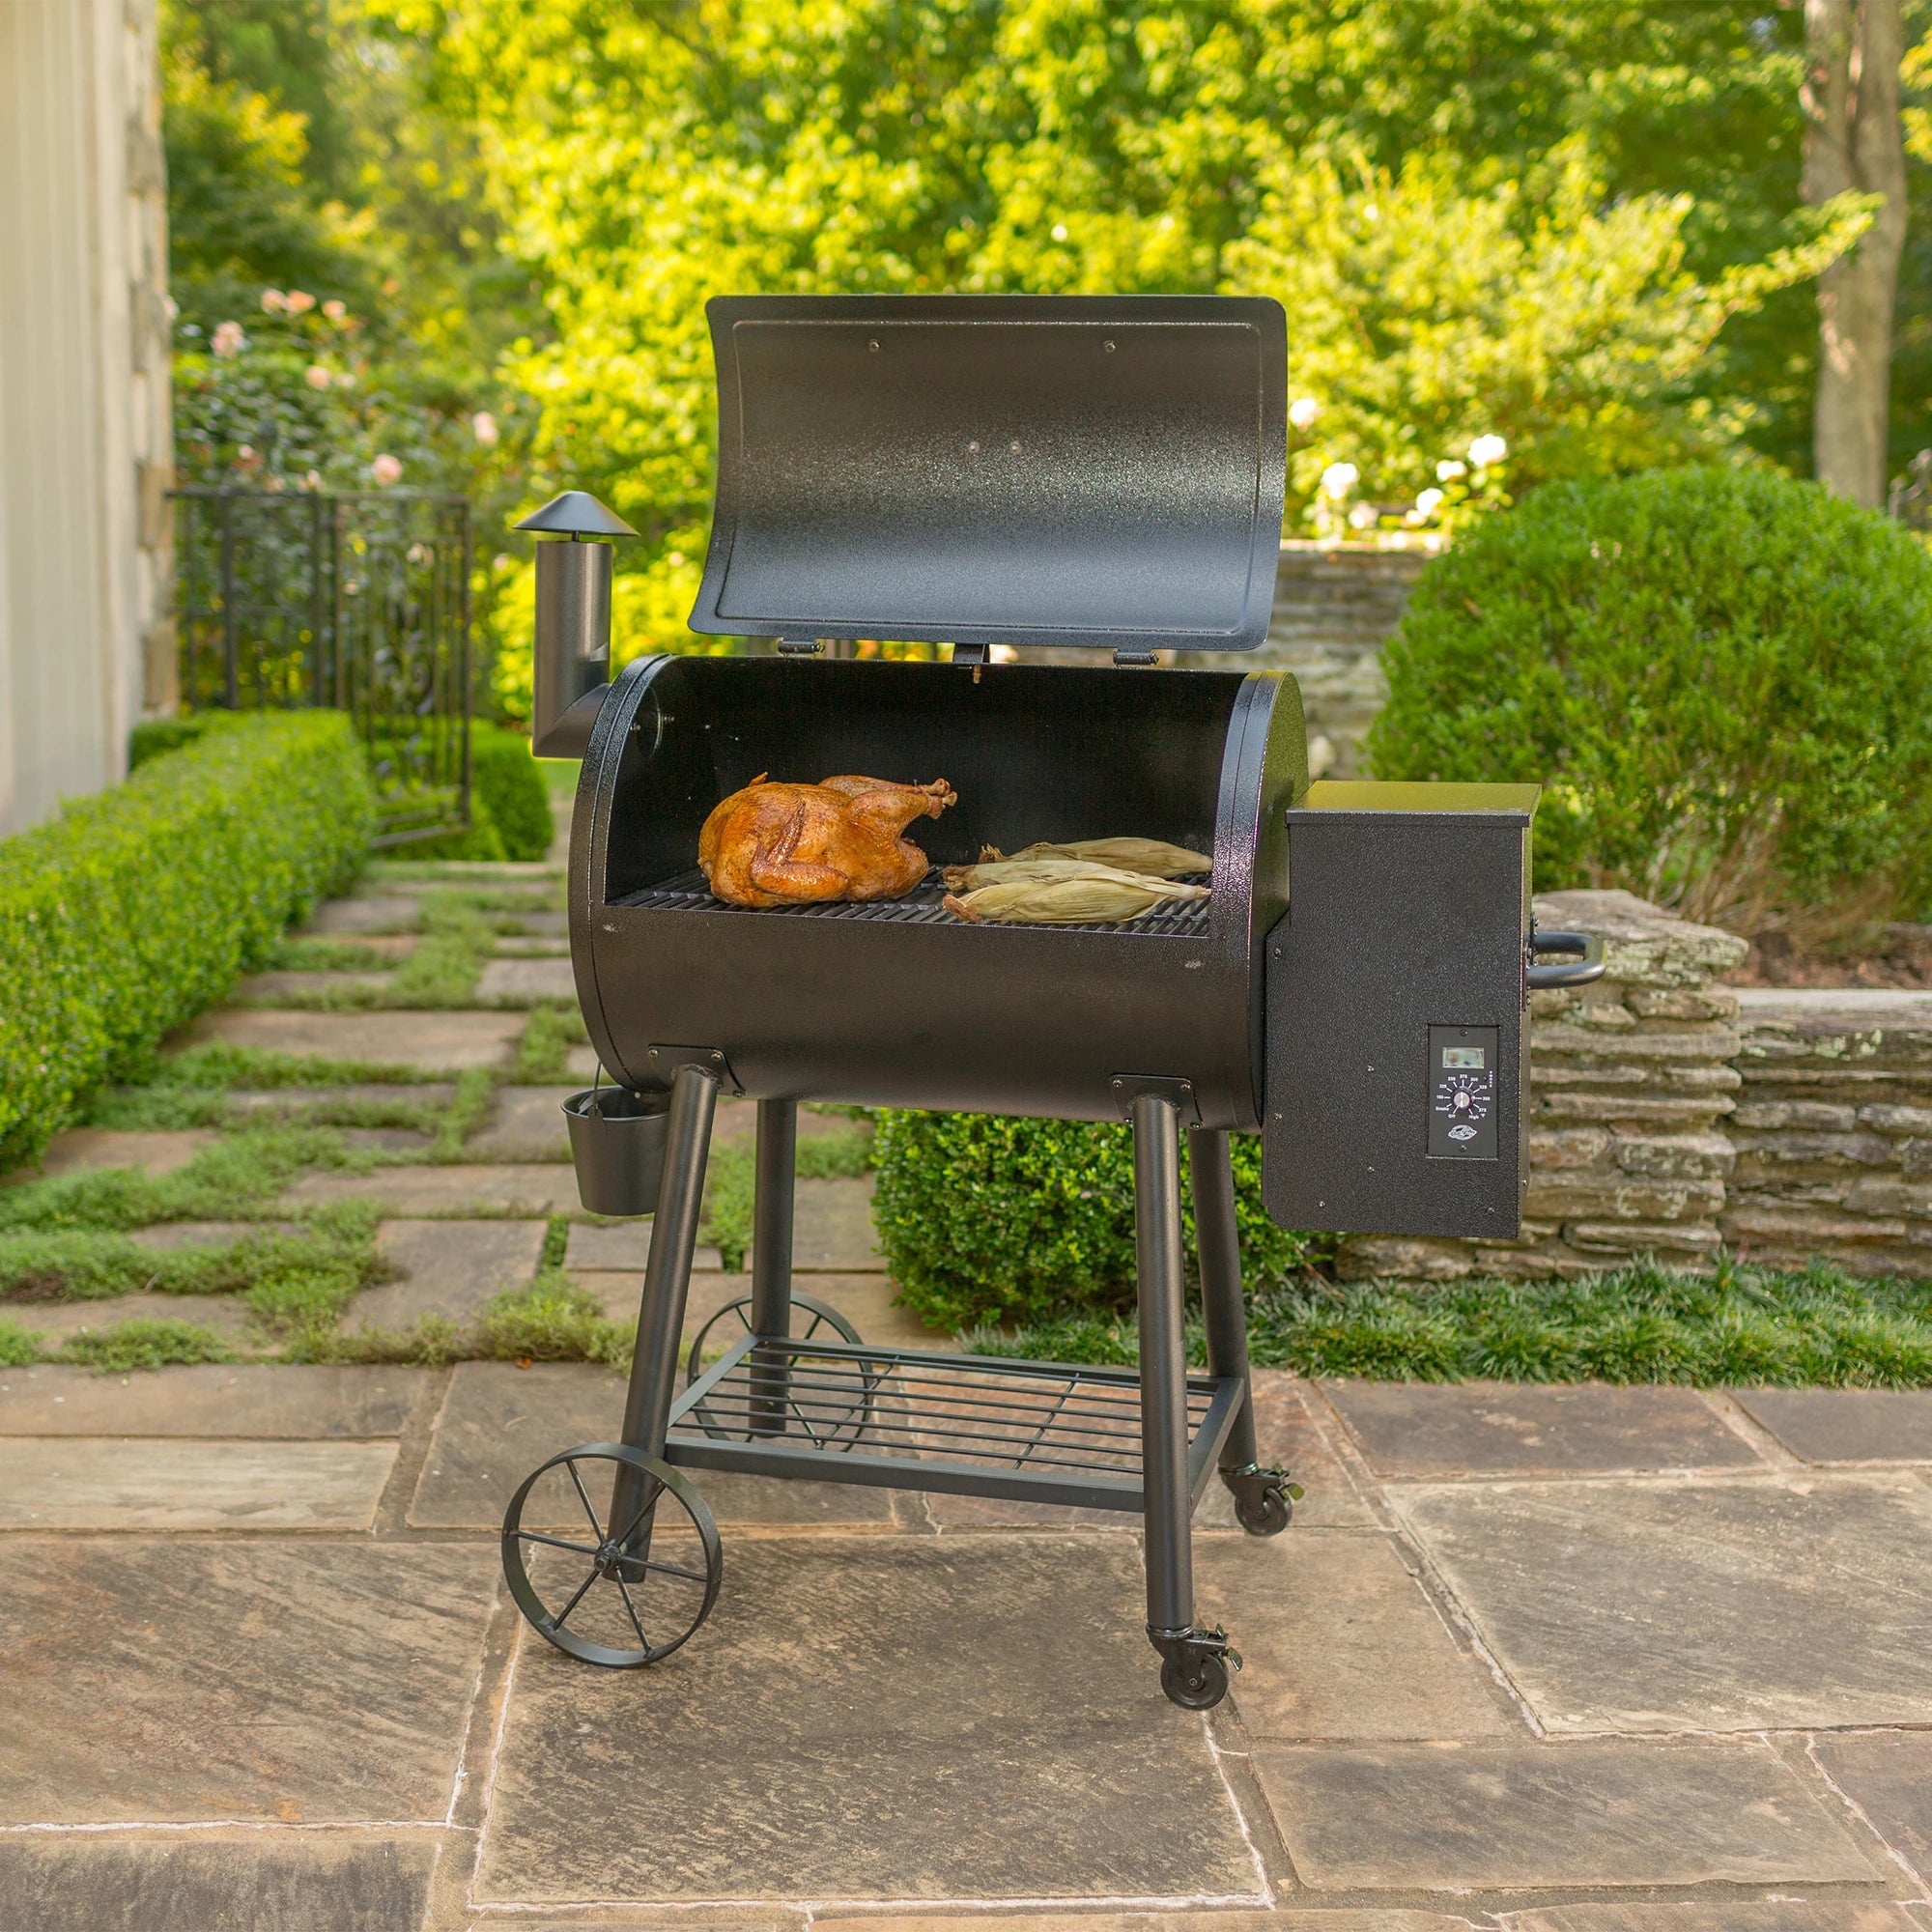 A Wood Pro grill sits open on a paved patio. A whole chicken and several ears of corn sit on the grate.